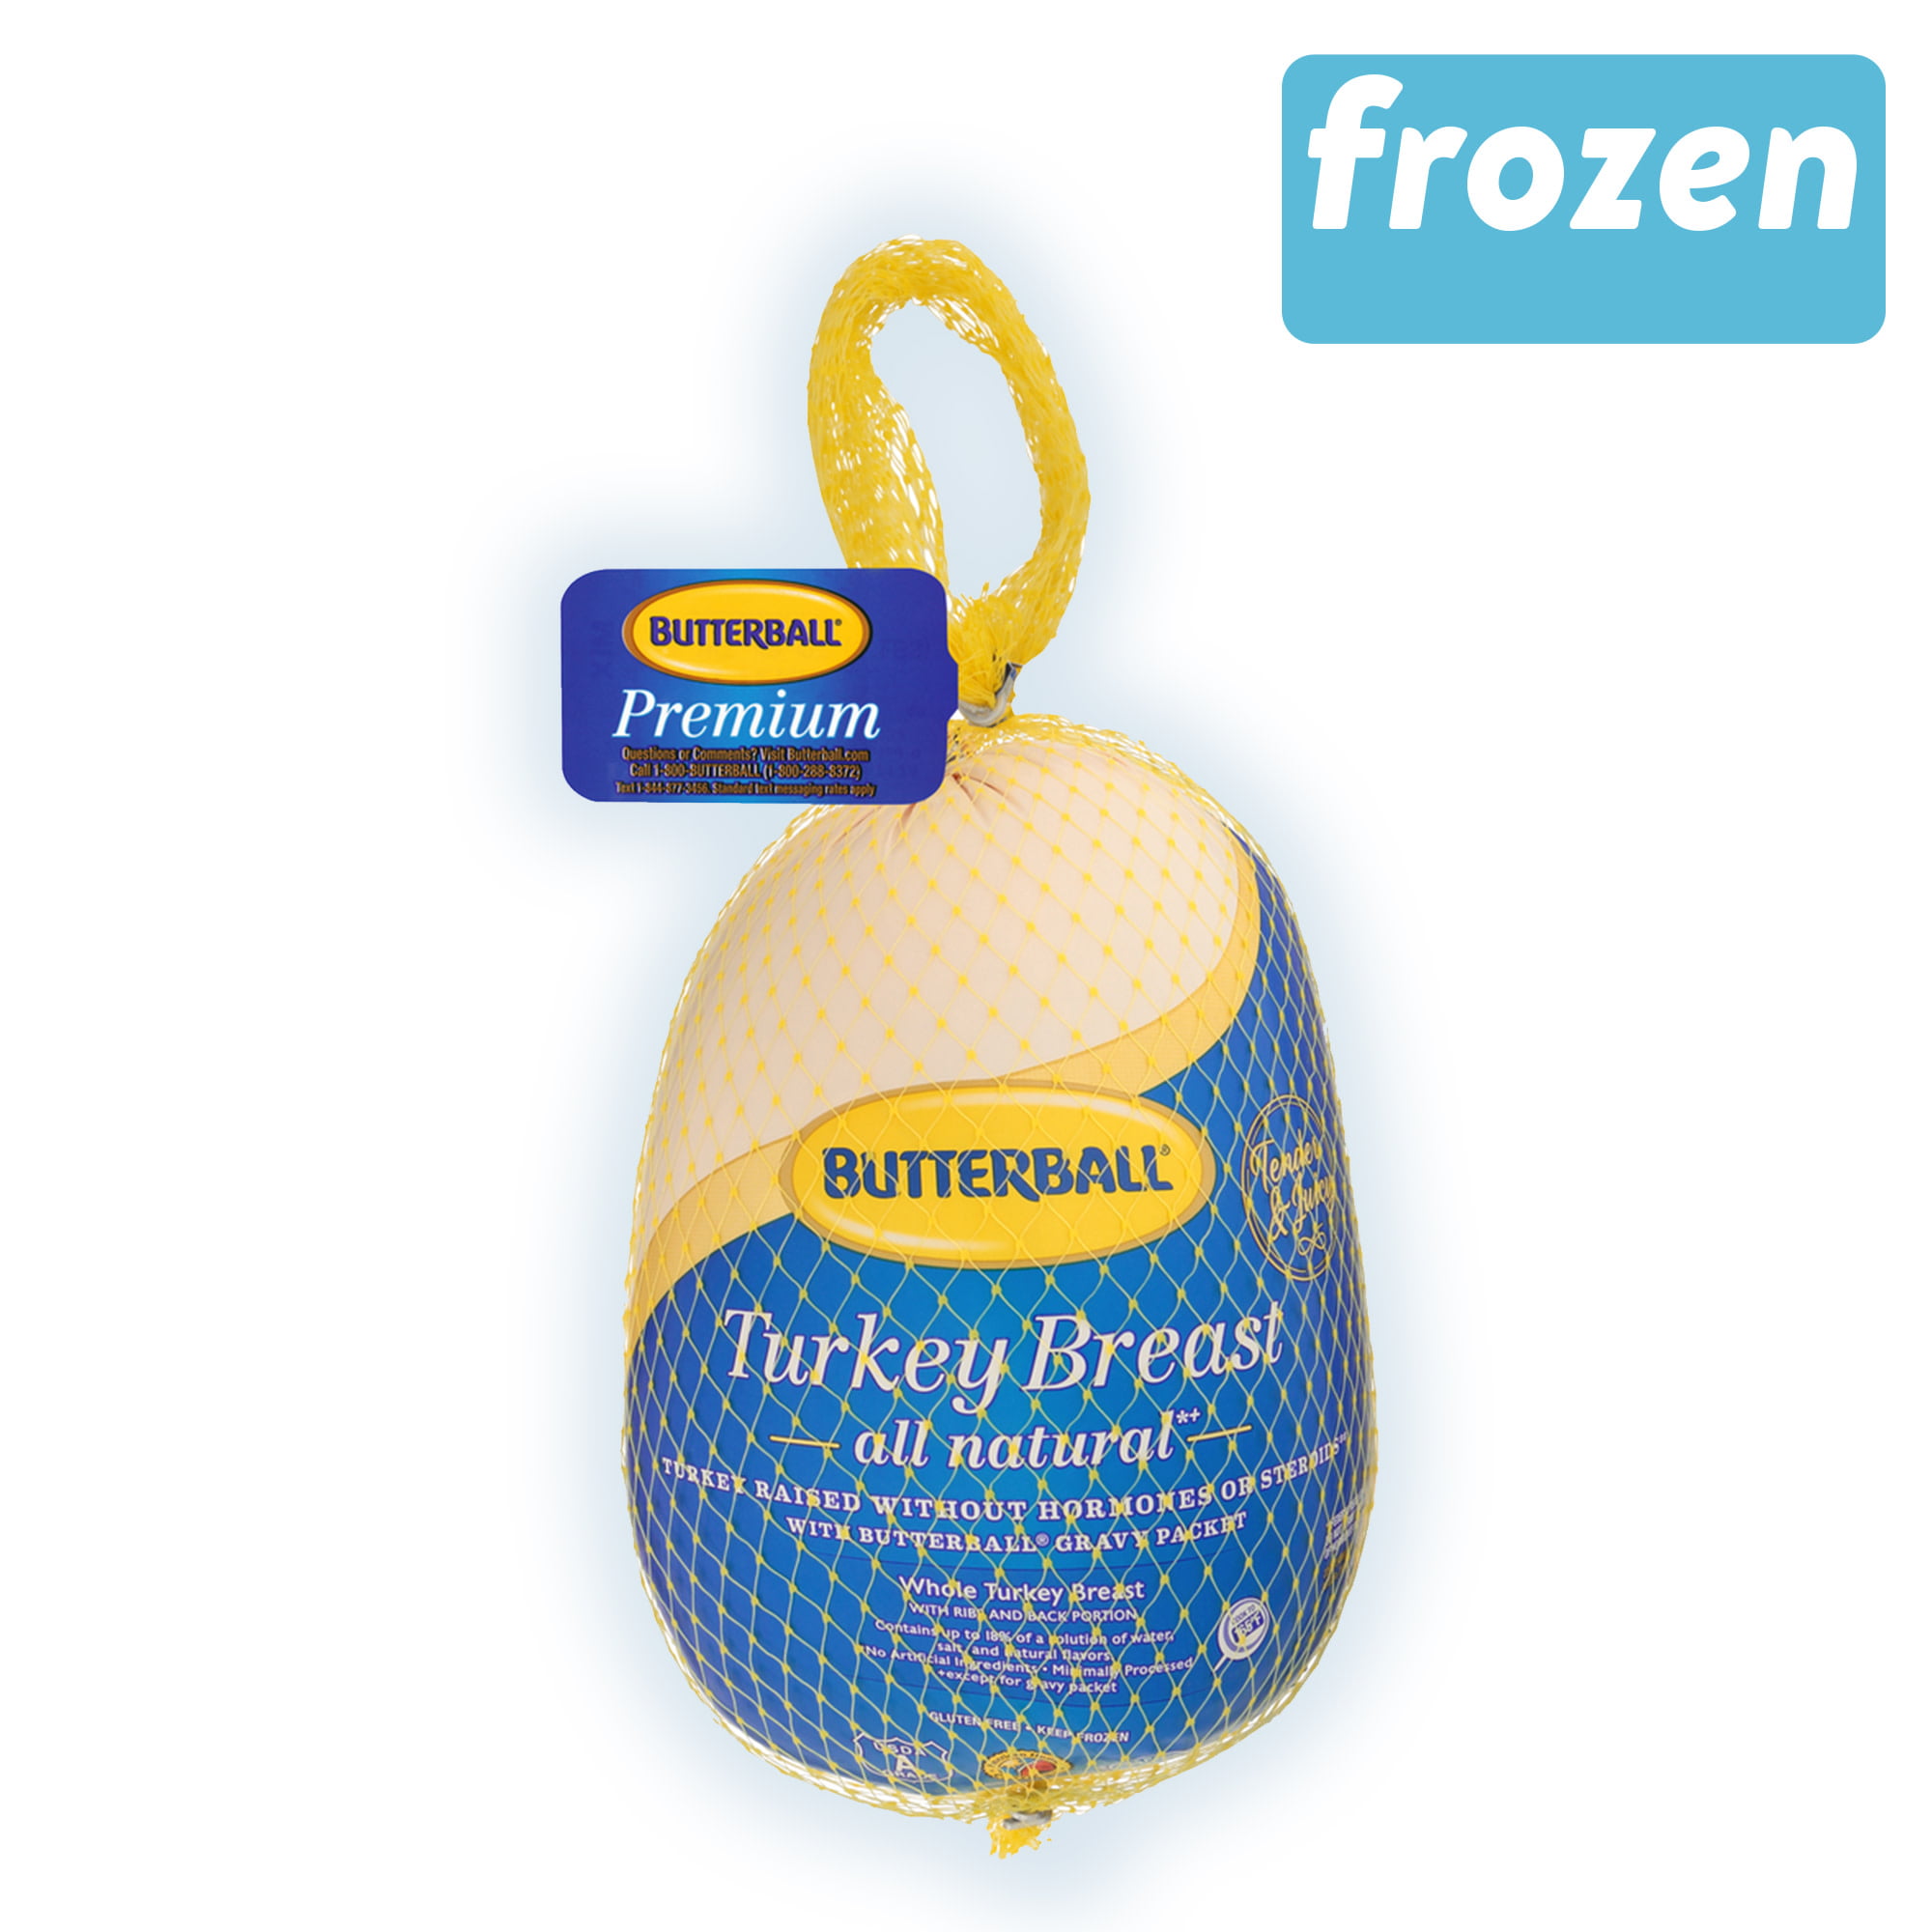 Butterball All Natural Whole Turkey Breast, Frozen, 5.5-8.5 lbs